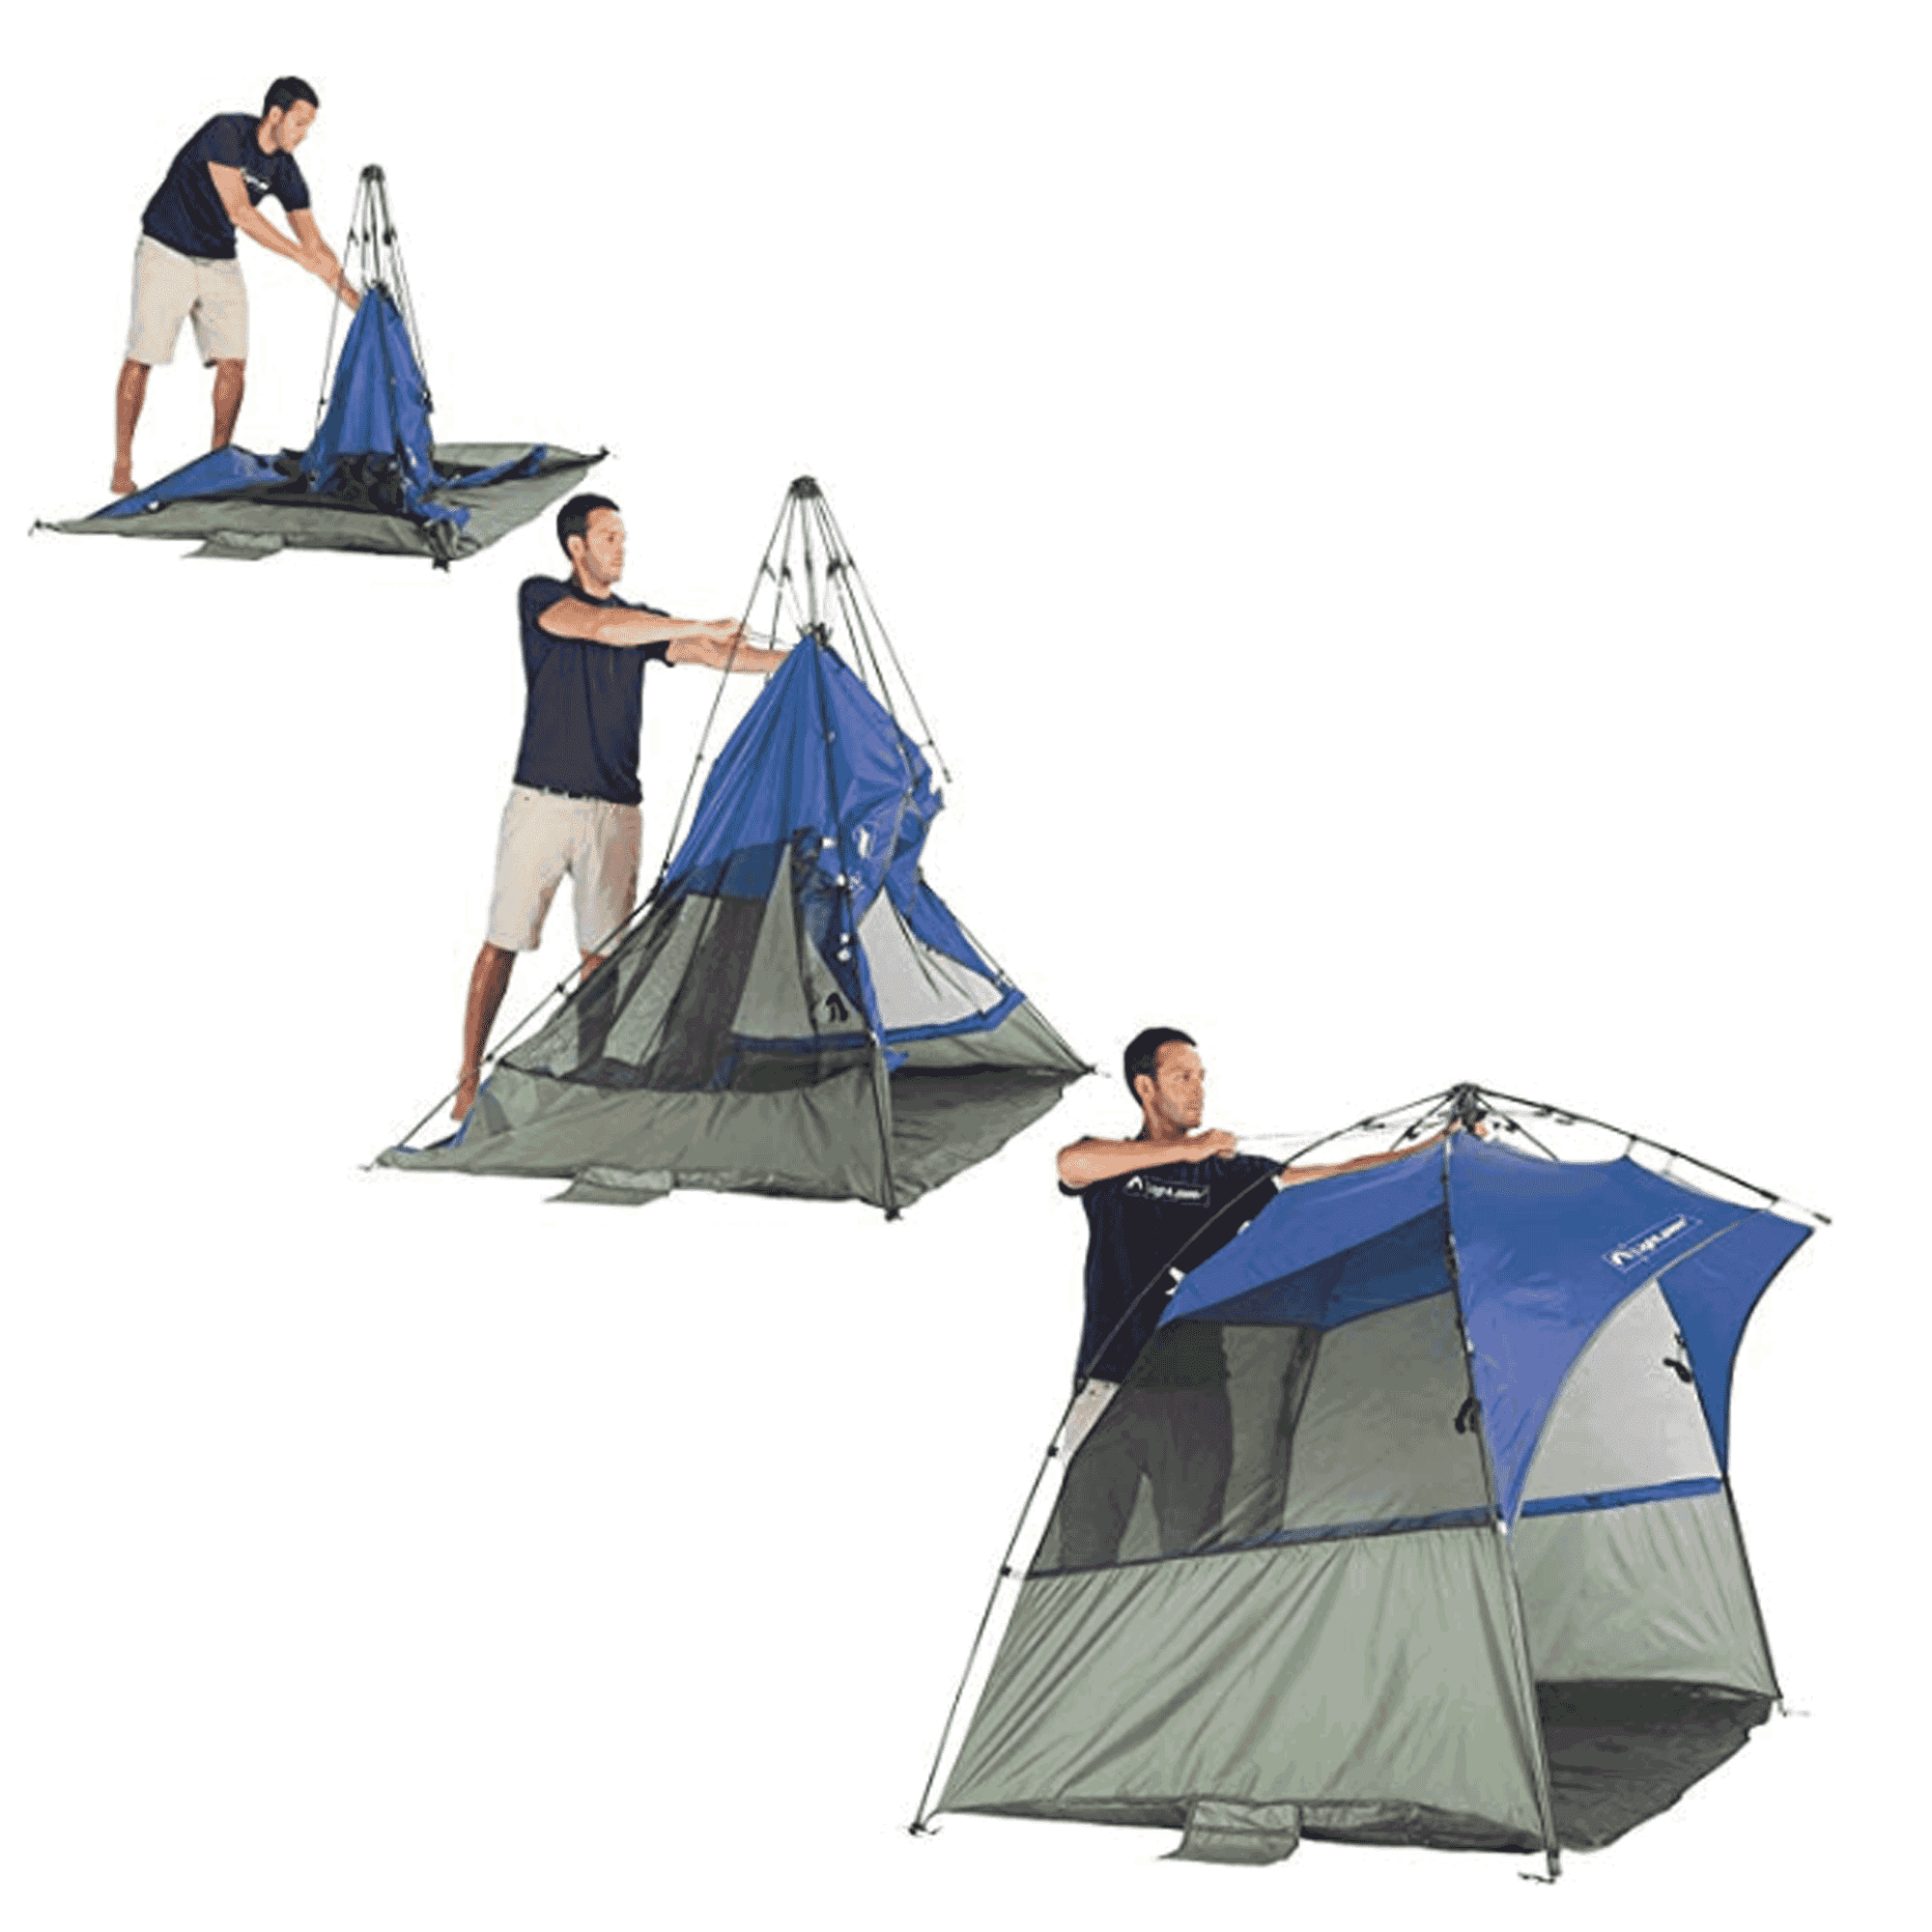 NEW Lightspeed Outdoors XL Sport Shelter Instant Pop Up FREE SHIPPING 